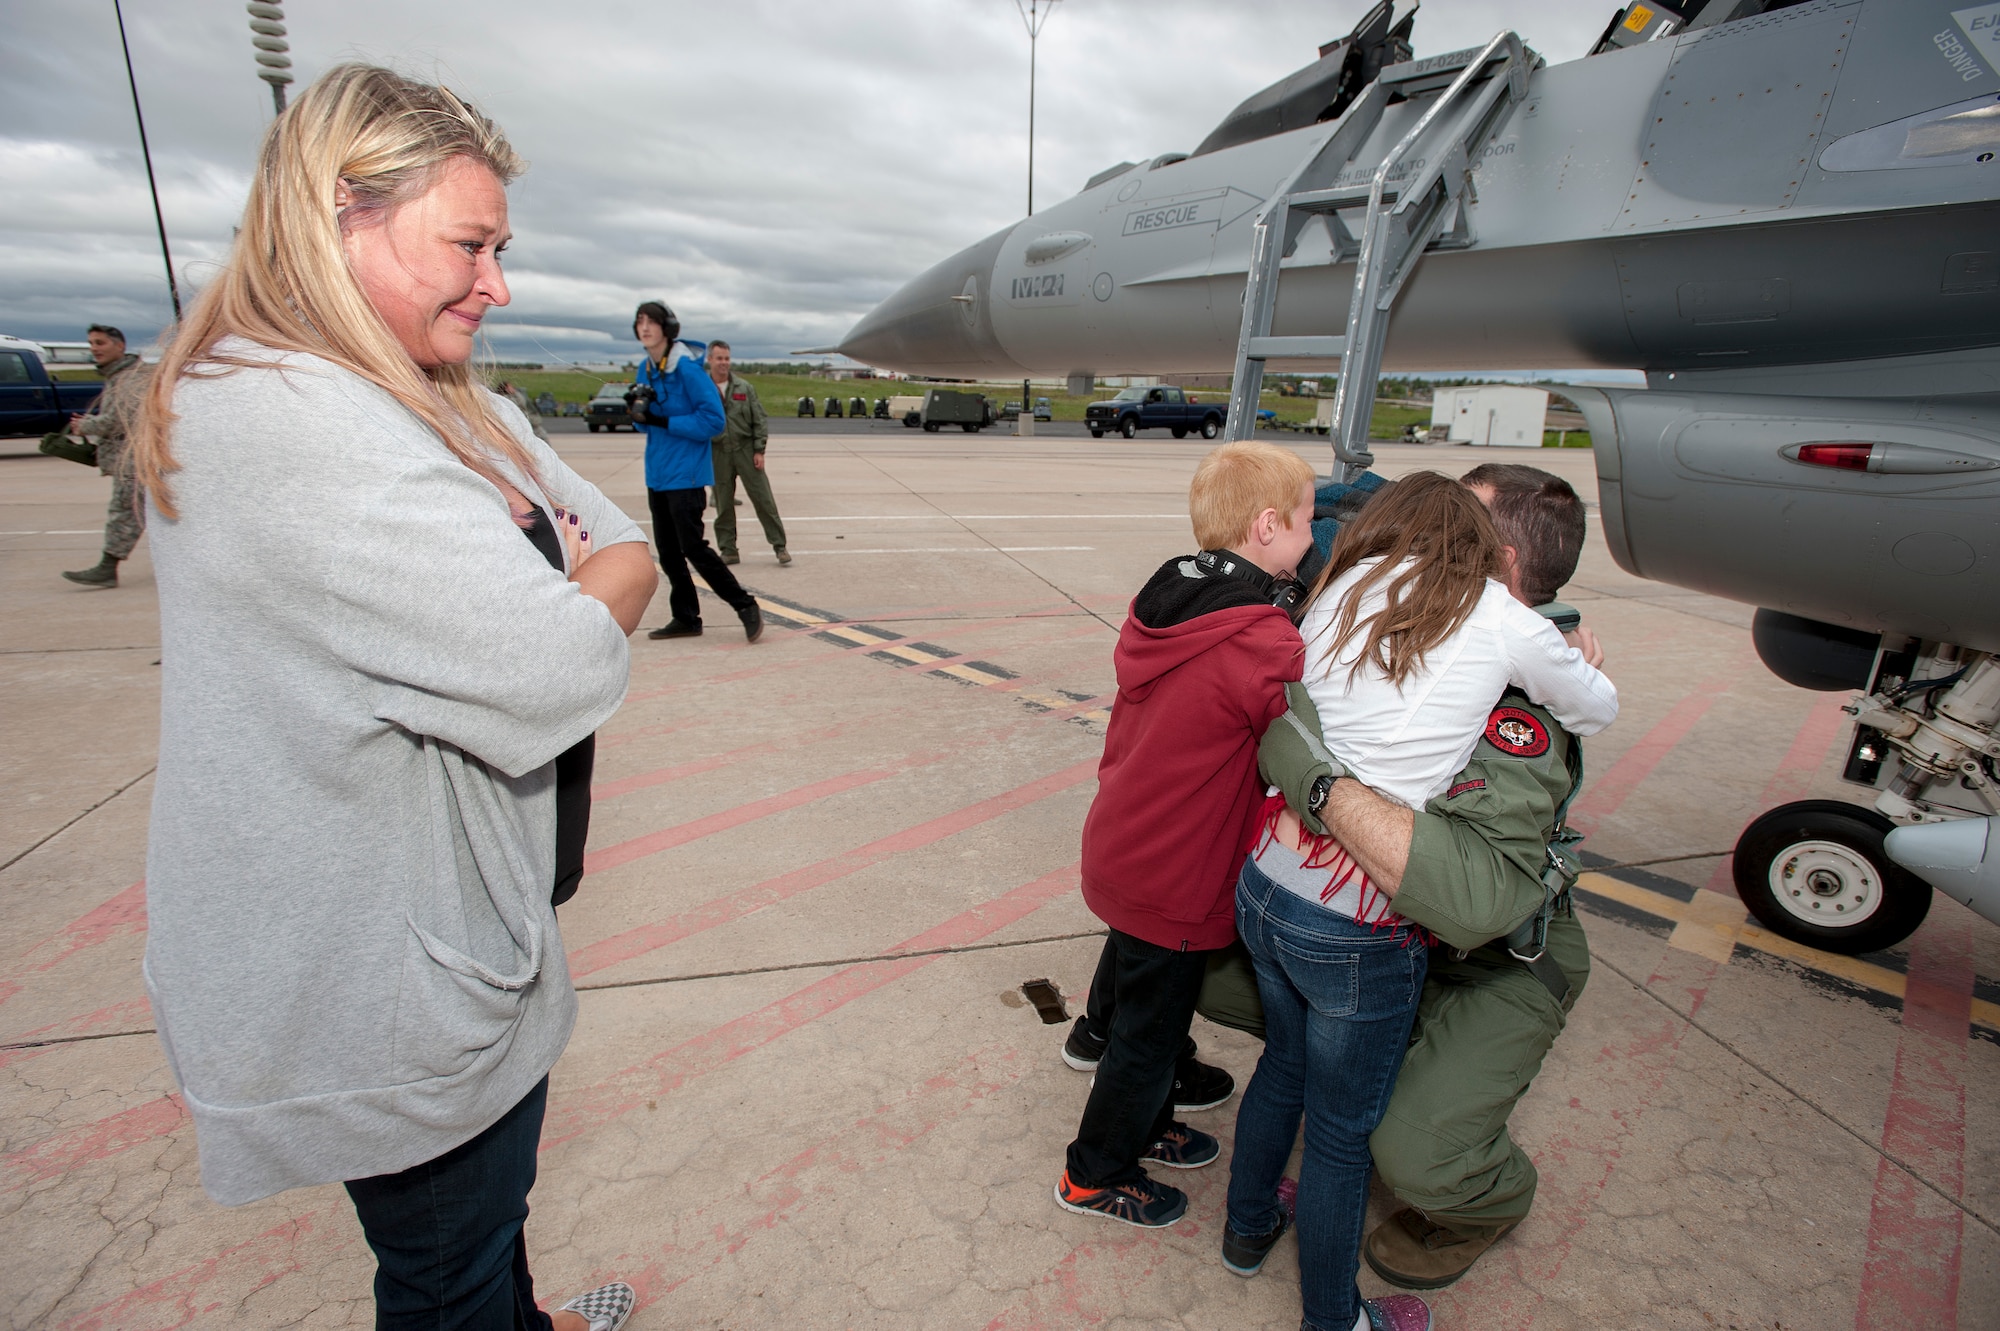 U.S. Air Force Lt. Col. Kurt Tongren???s family welcomes him home after landing an F-16 Fighting Falcon from the 120th Fighter Squadron, Colorado Air National Guard, at Buckley Air Force Base, Colo., upon his return from a deployment to the Republic of Korea, May 19, 2015. Integrating with other U.S. Air Force members, flying daily training mission and providing a Theater Security Package for the past 90 days, this return home marks the completion of the seventh deployment for the "Redeyes" of the 120th FS along with the 140th Wing since Sept. 11, 2001. (U.S. Air National Guard photo by: Tech. Sgt. Wolfram M. Stumpf/RELEASED)